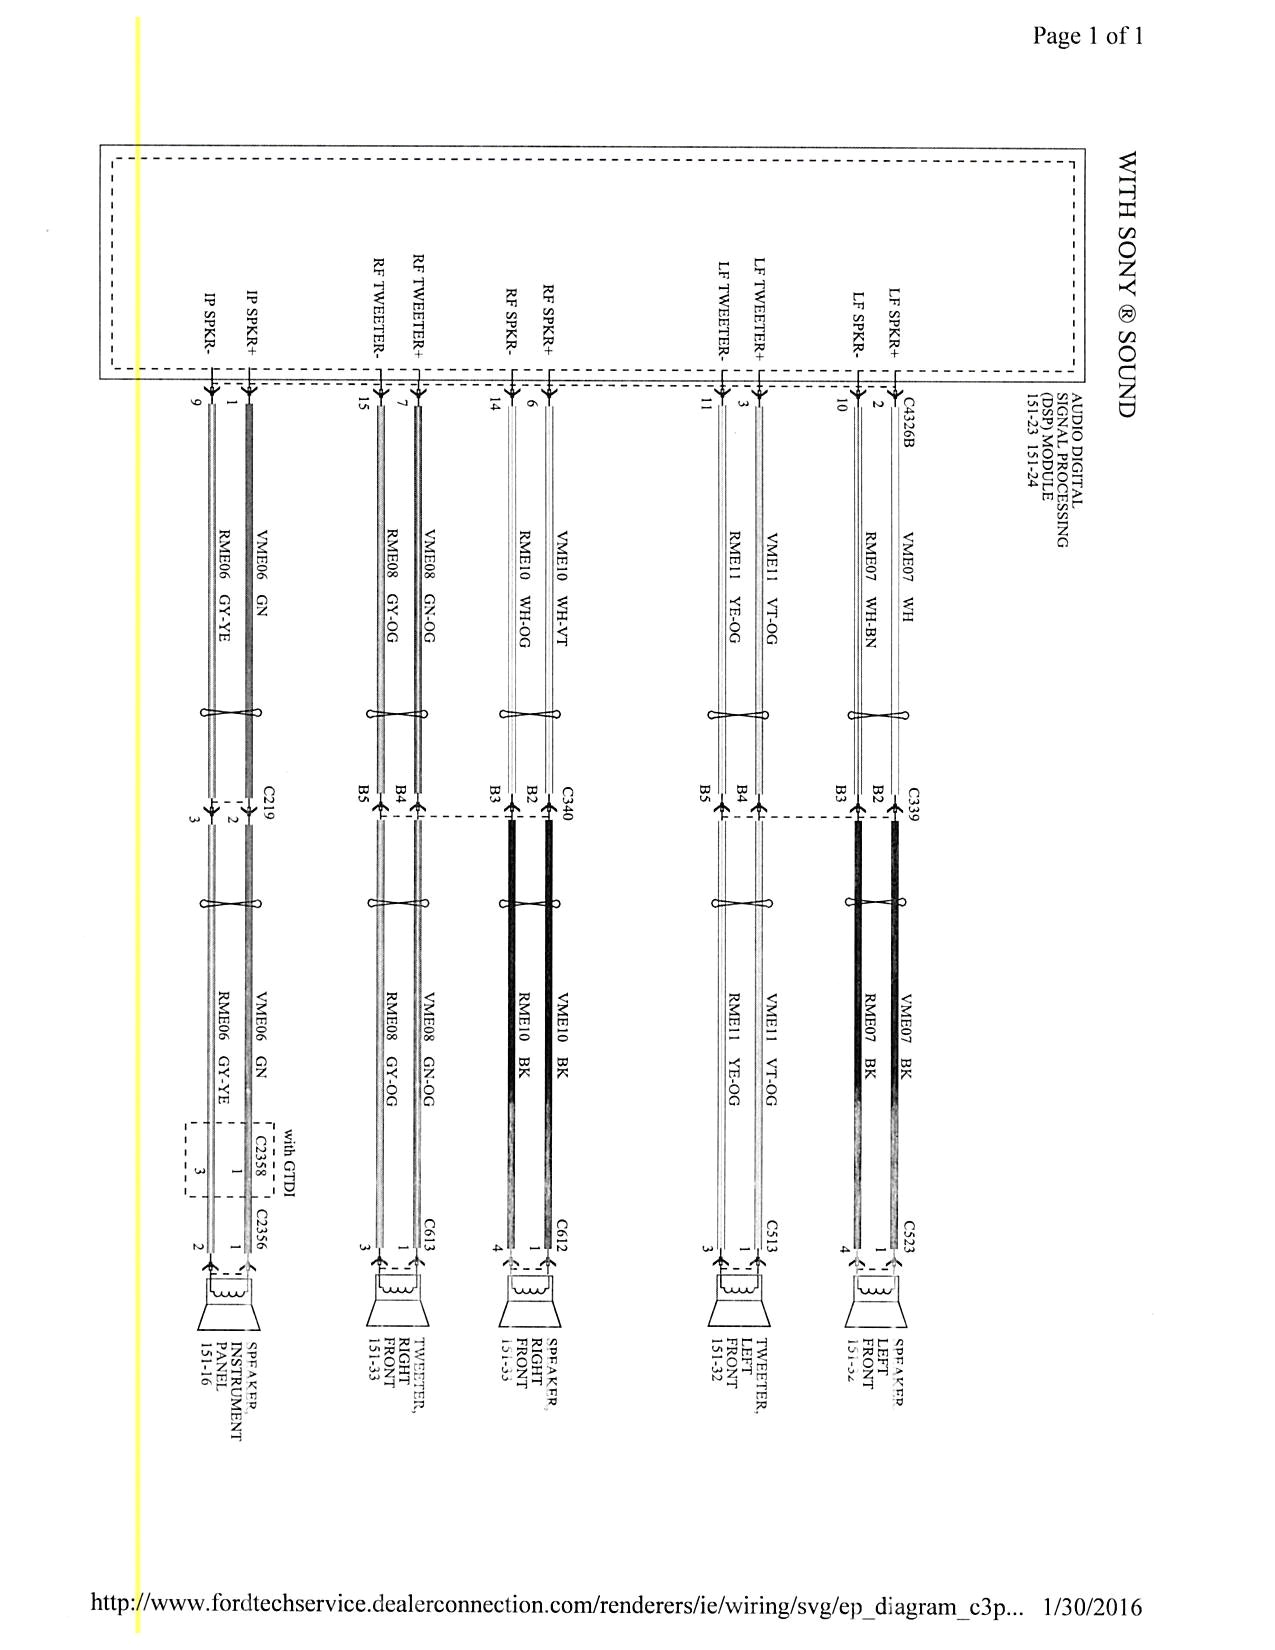 wire diagram of the tx territory head unit australian ford forums 2015 focus mk3 5 stereo